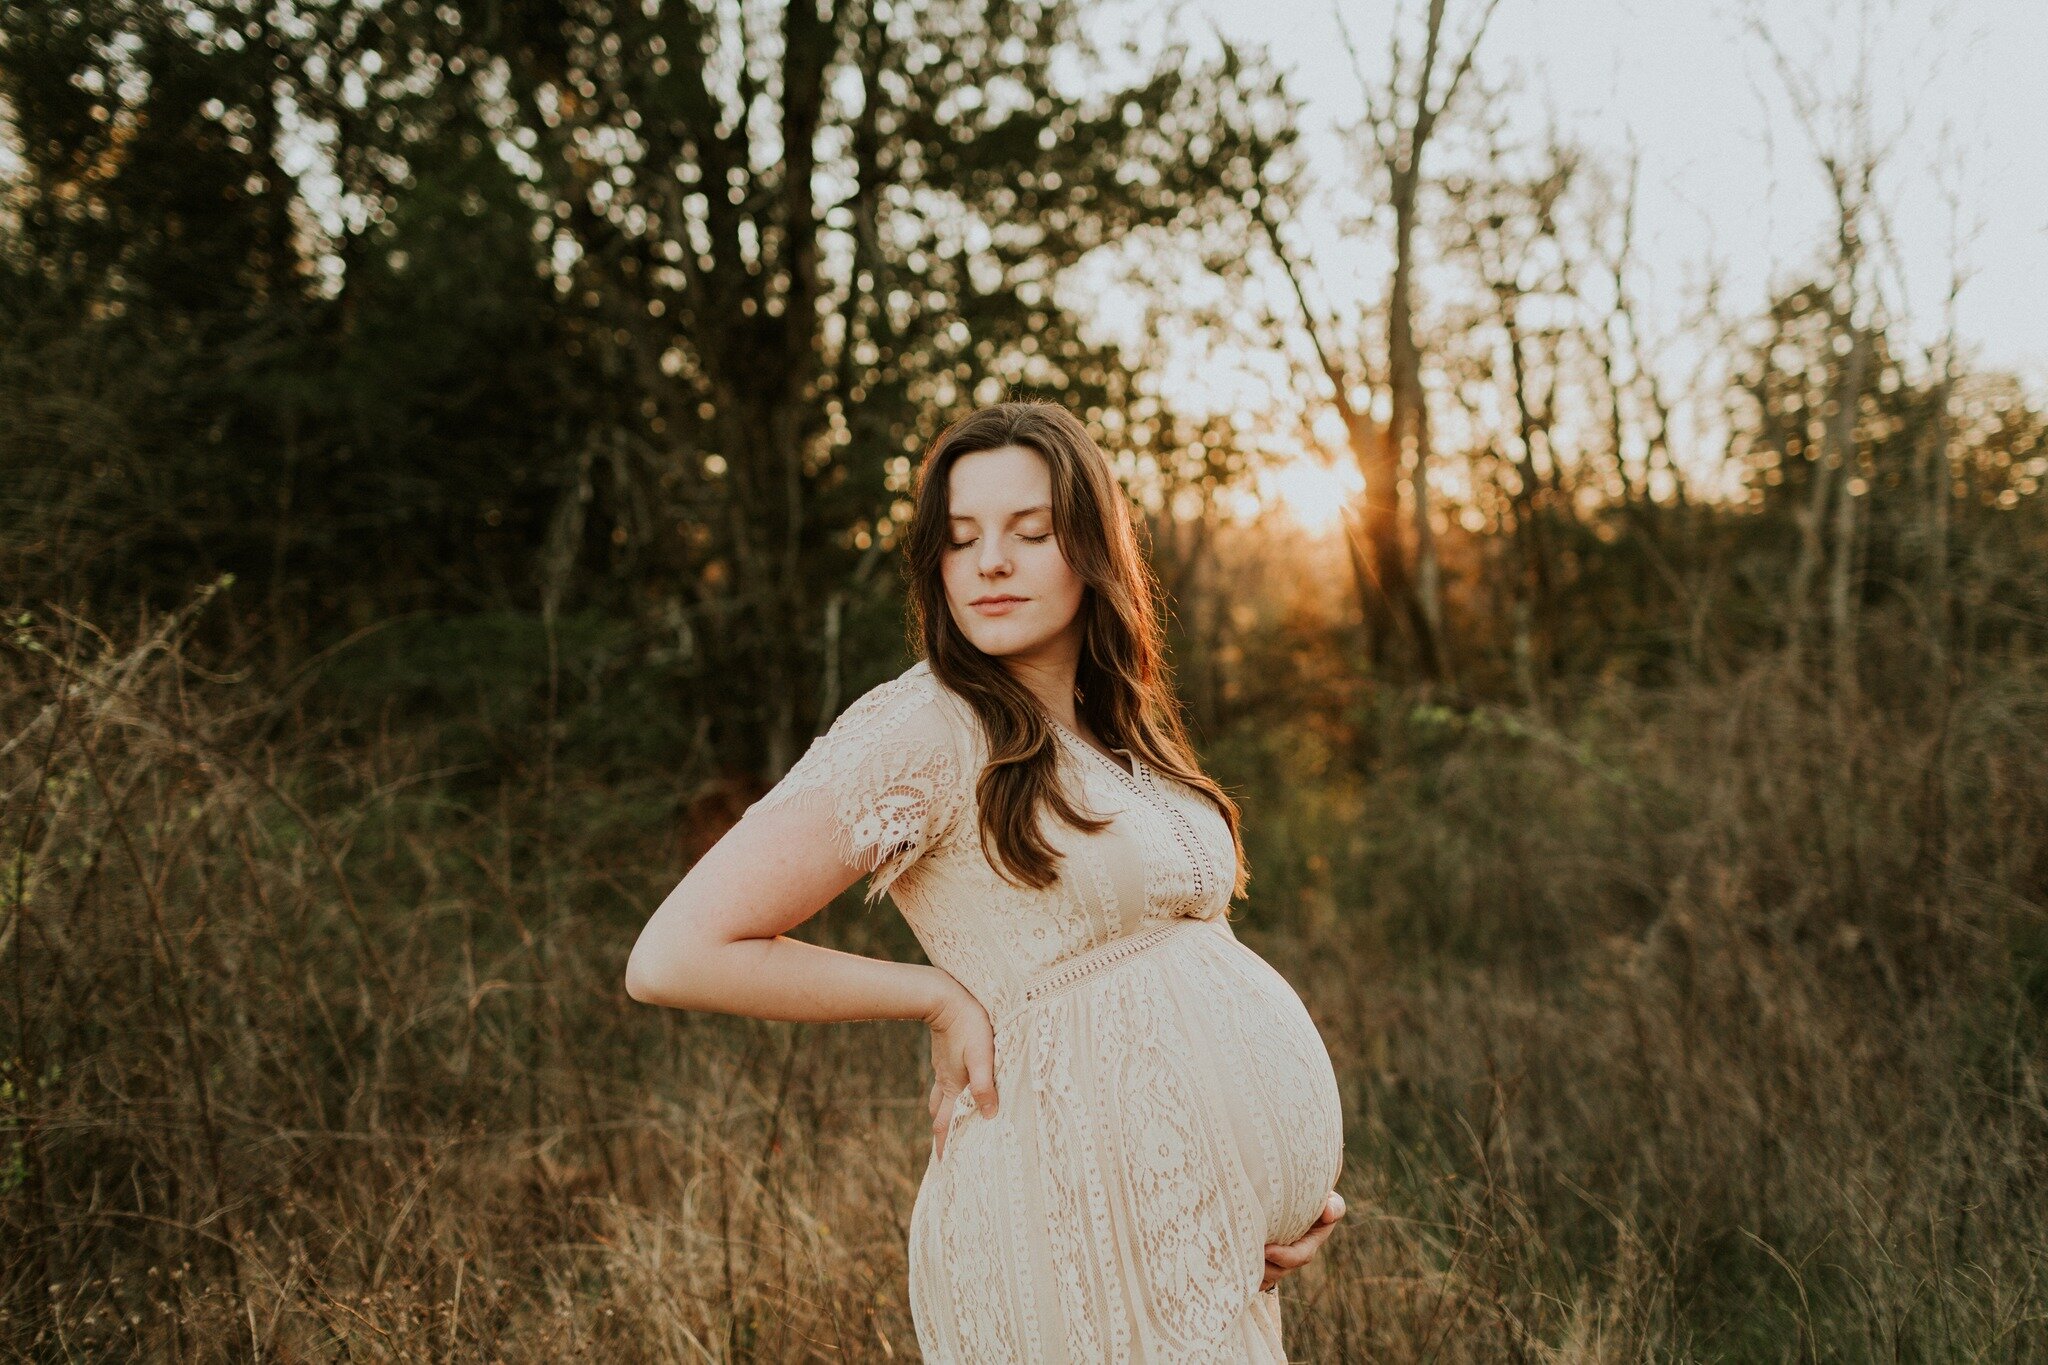 This  golden hour maternity session was just stunning! I absolutely adore this sweet family.